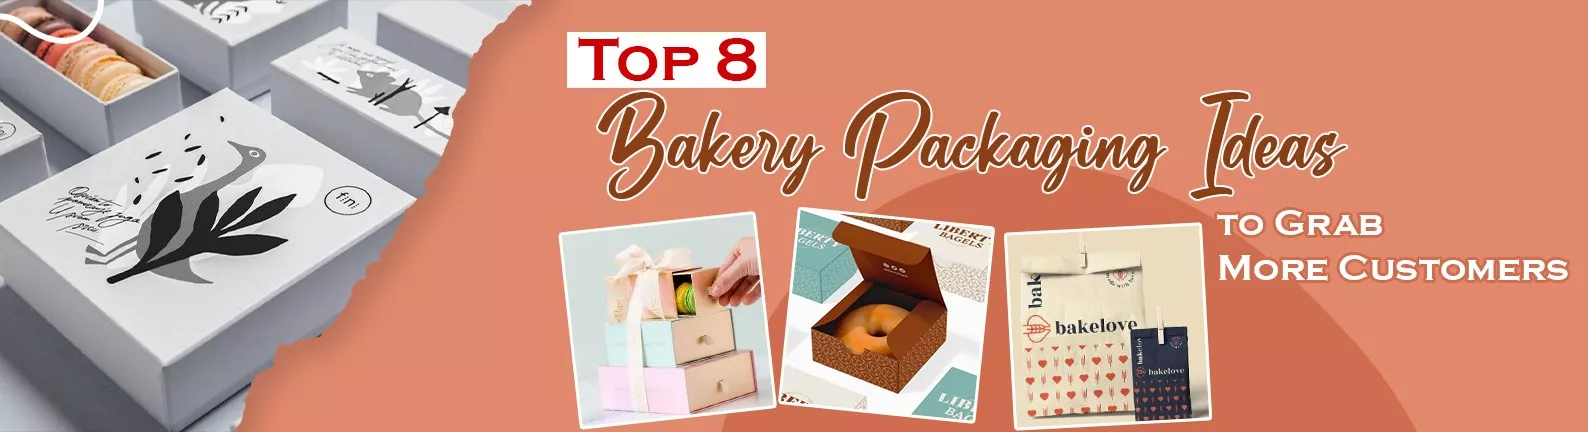 Top-8-Bakery-Packaging-Ideas-to-Grab-More-Customers